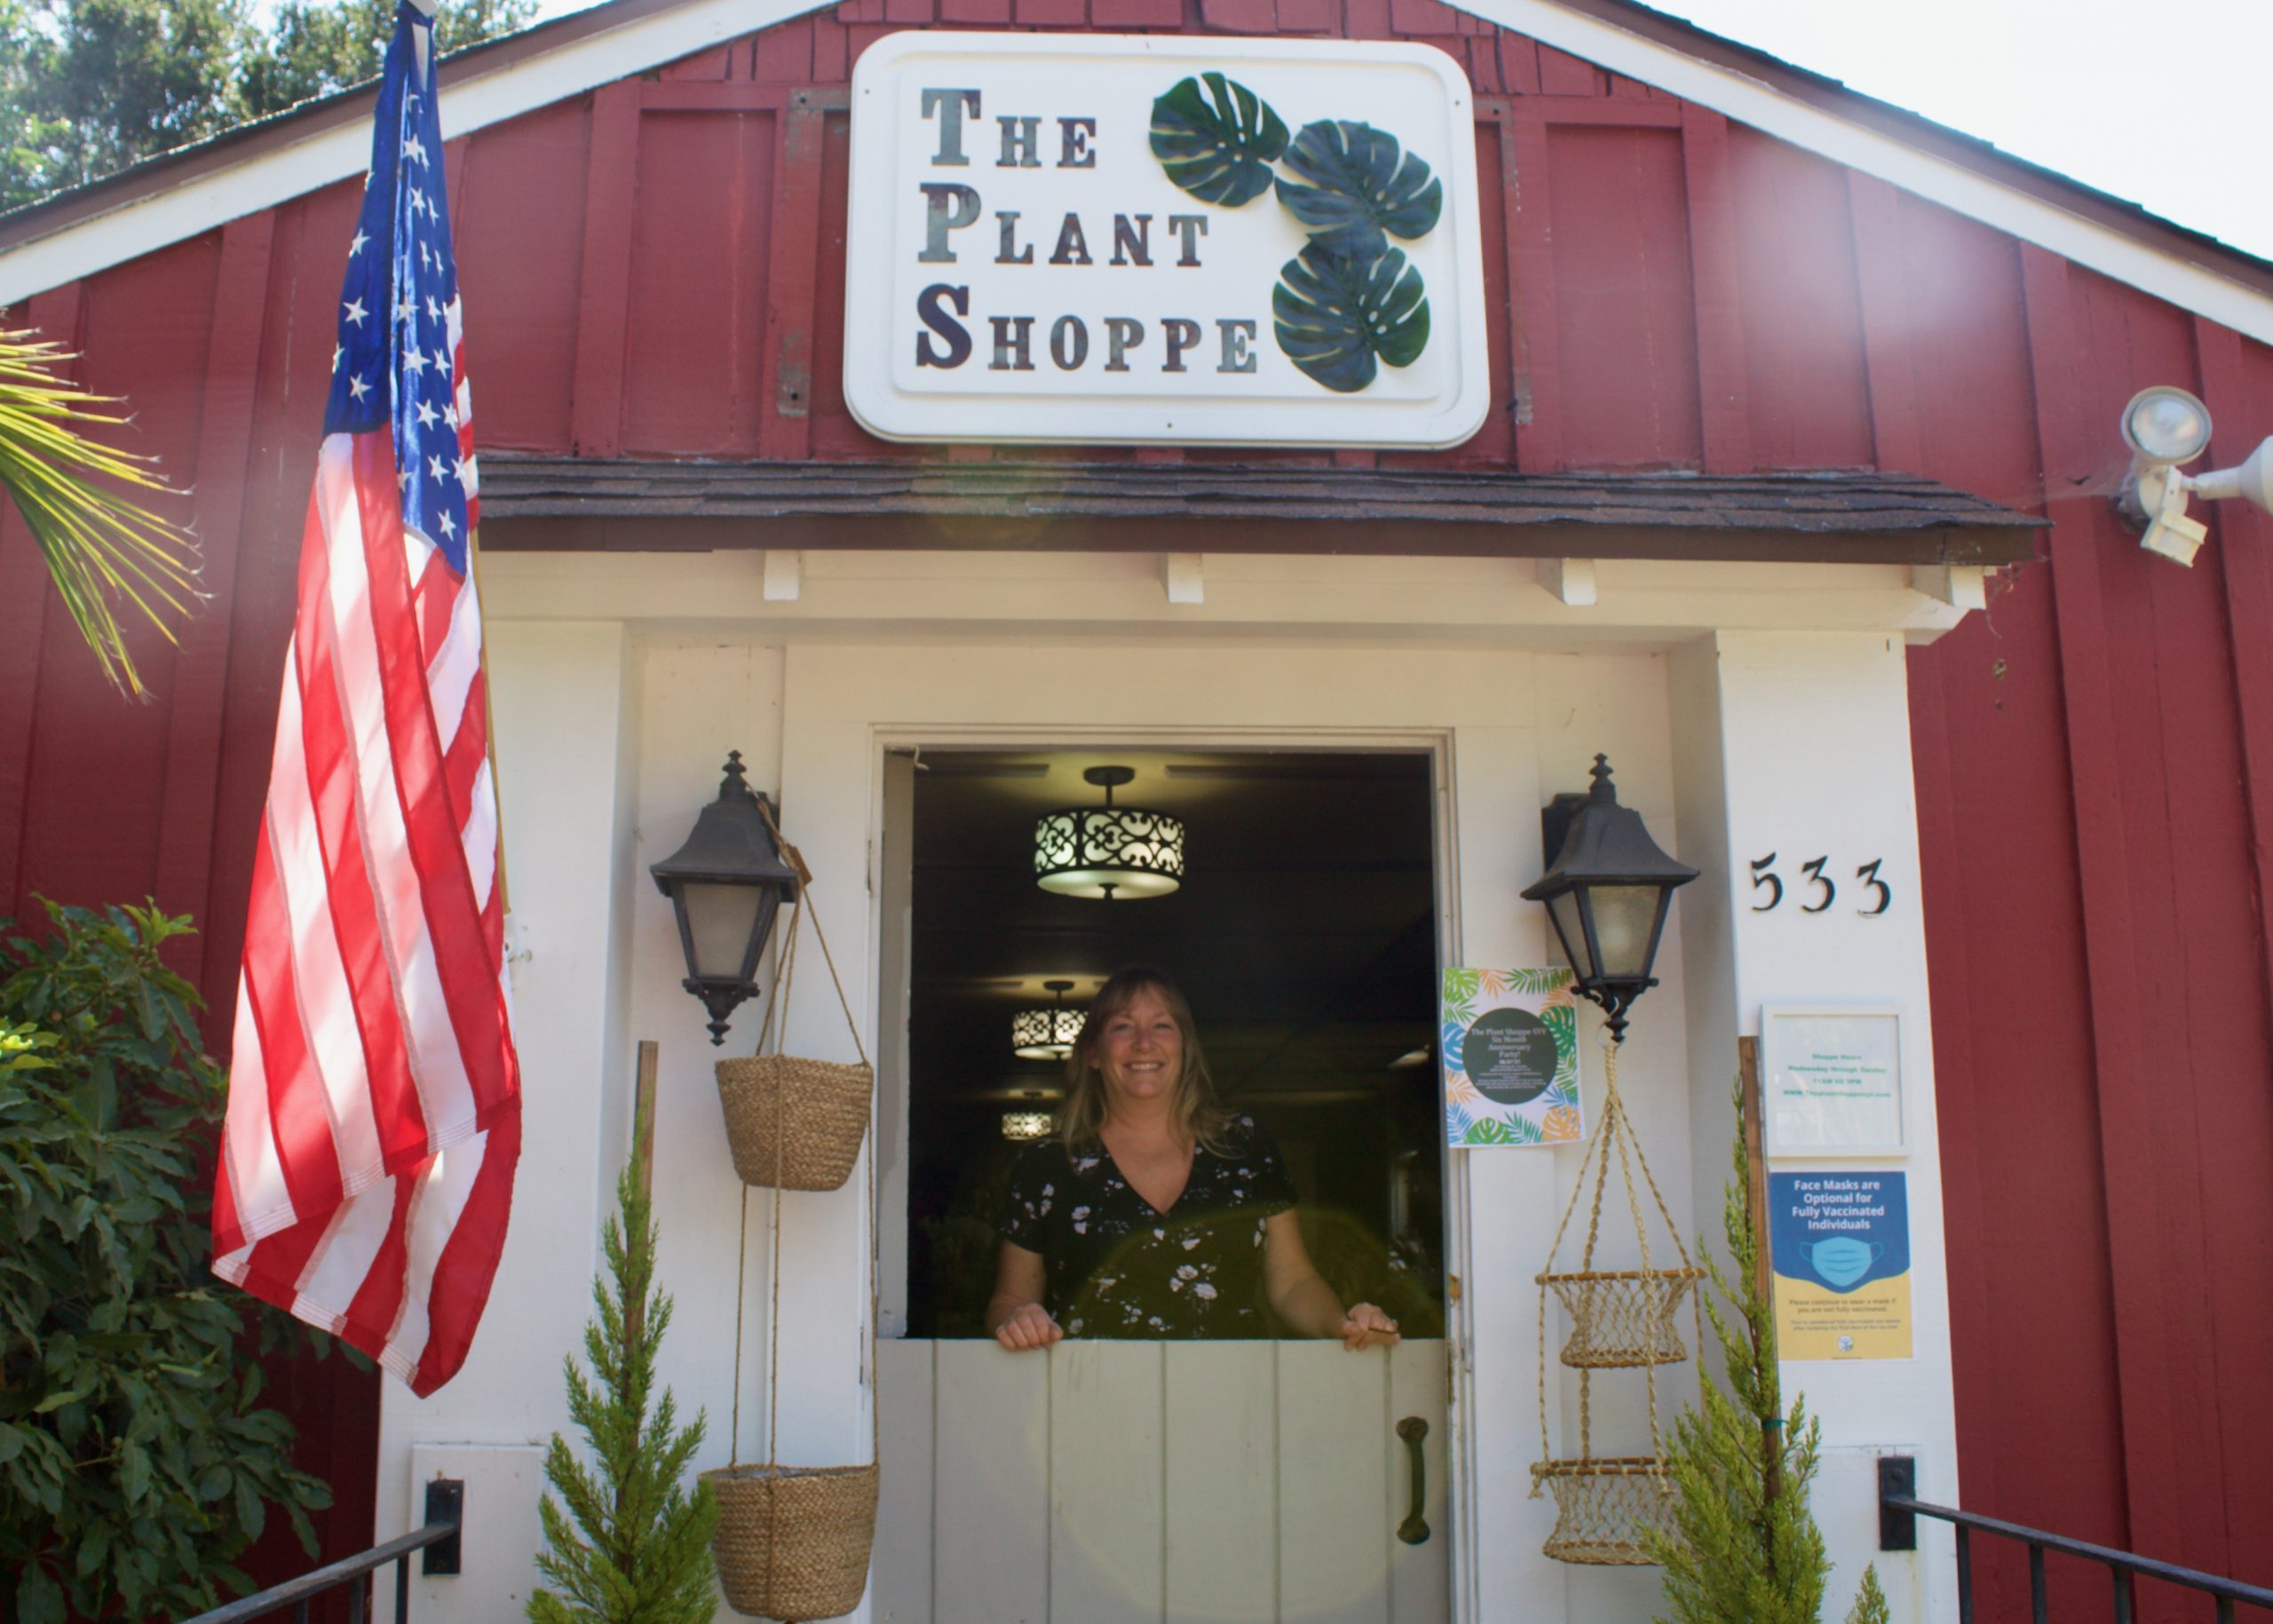 Search for your ‘soil-mate’ at The Plant Shoppe